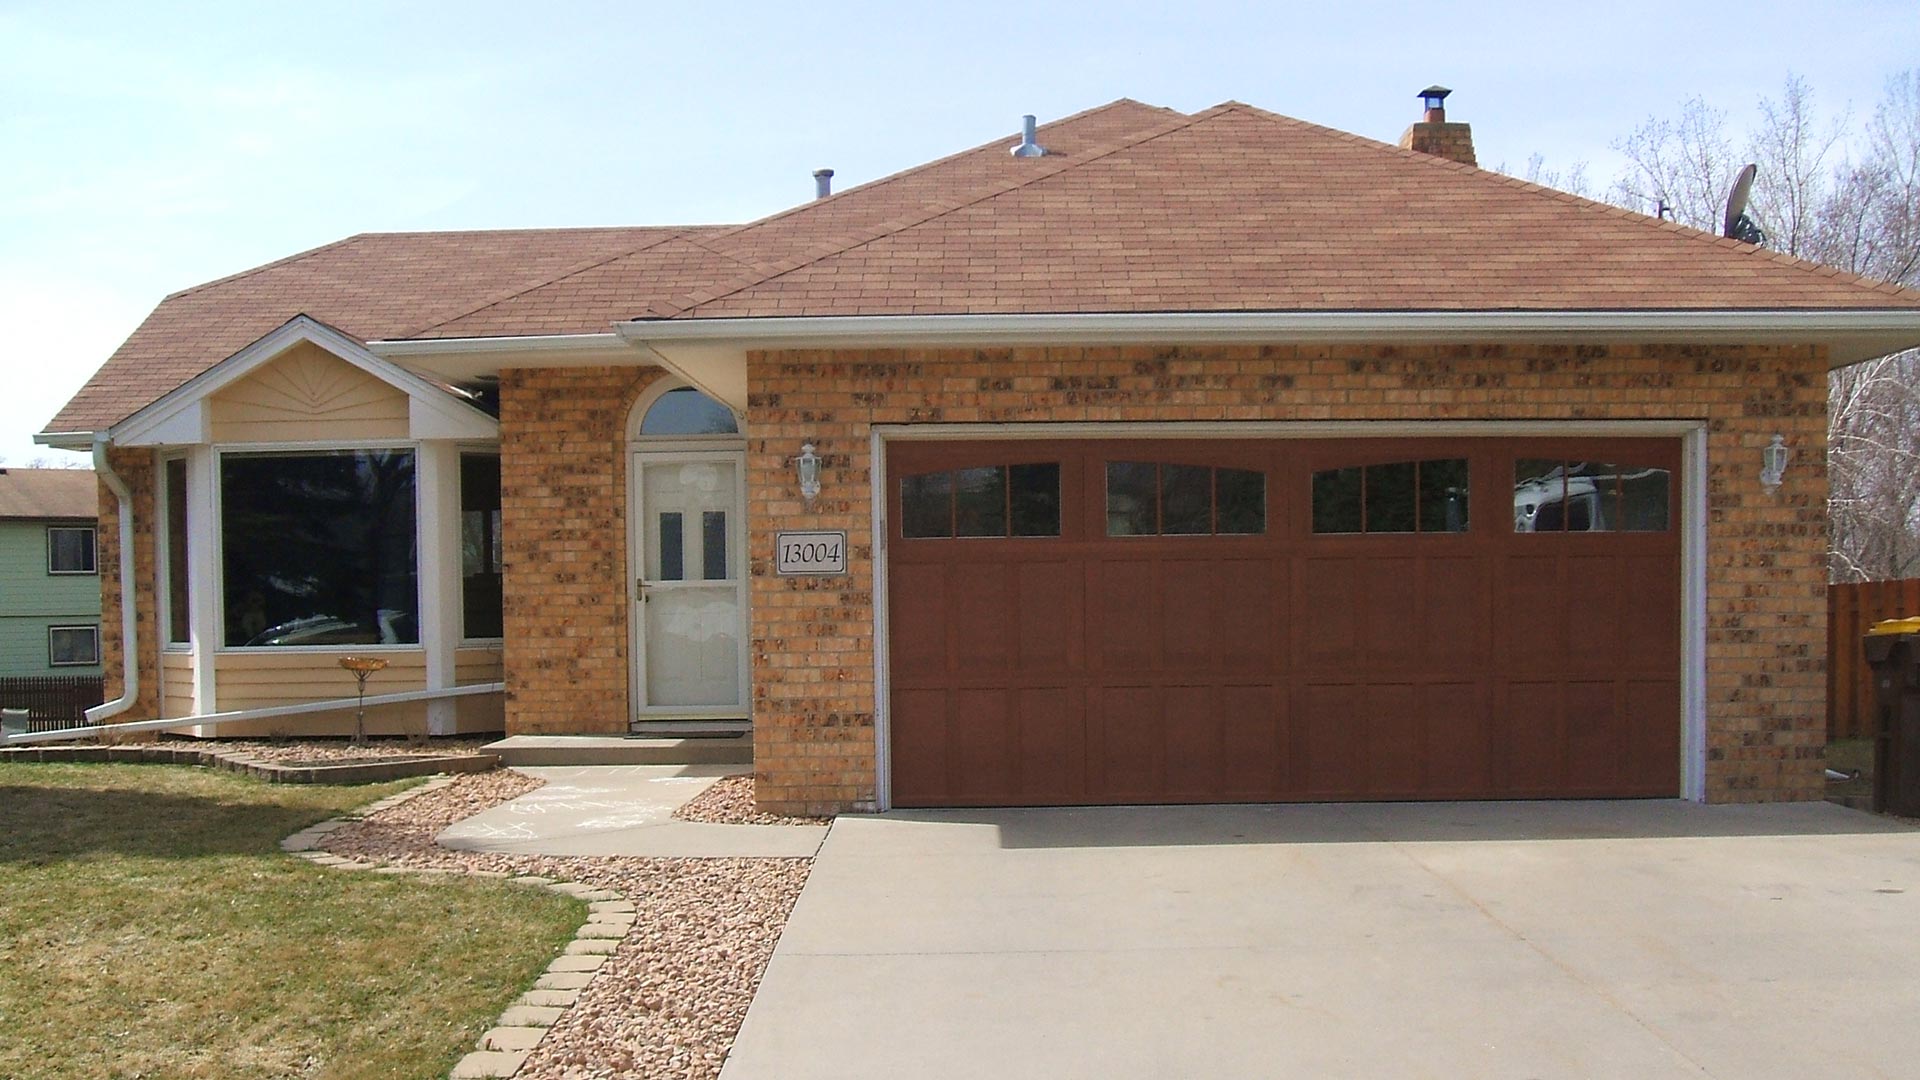 Residential double car garage door painted a burgundy color on a single family home.